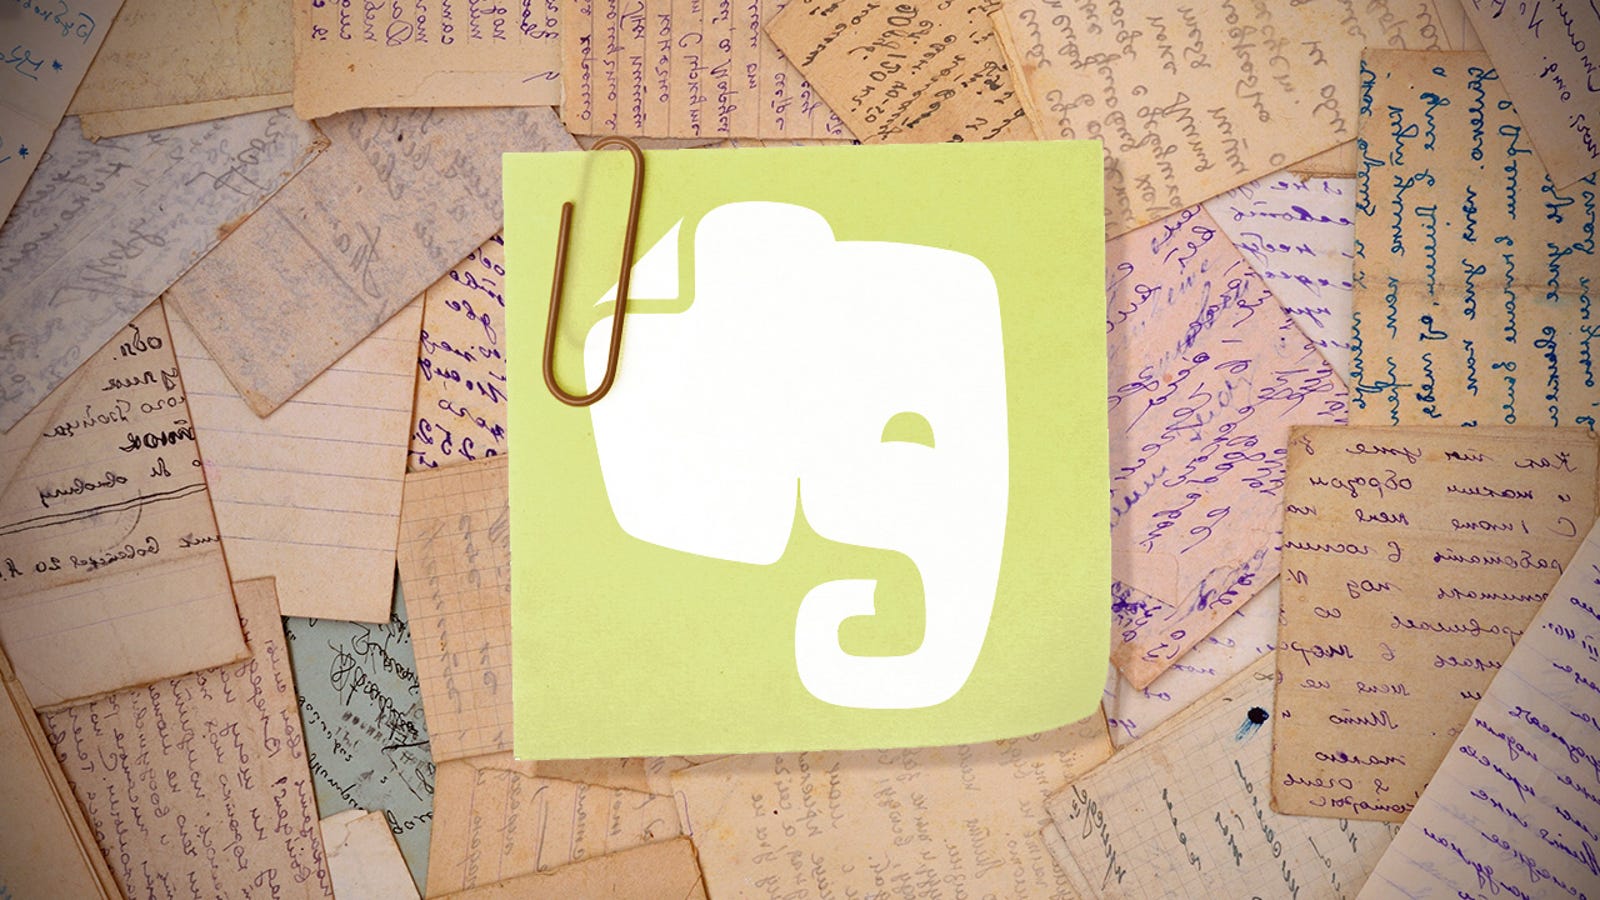 is evernote good for journaling